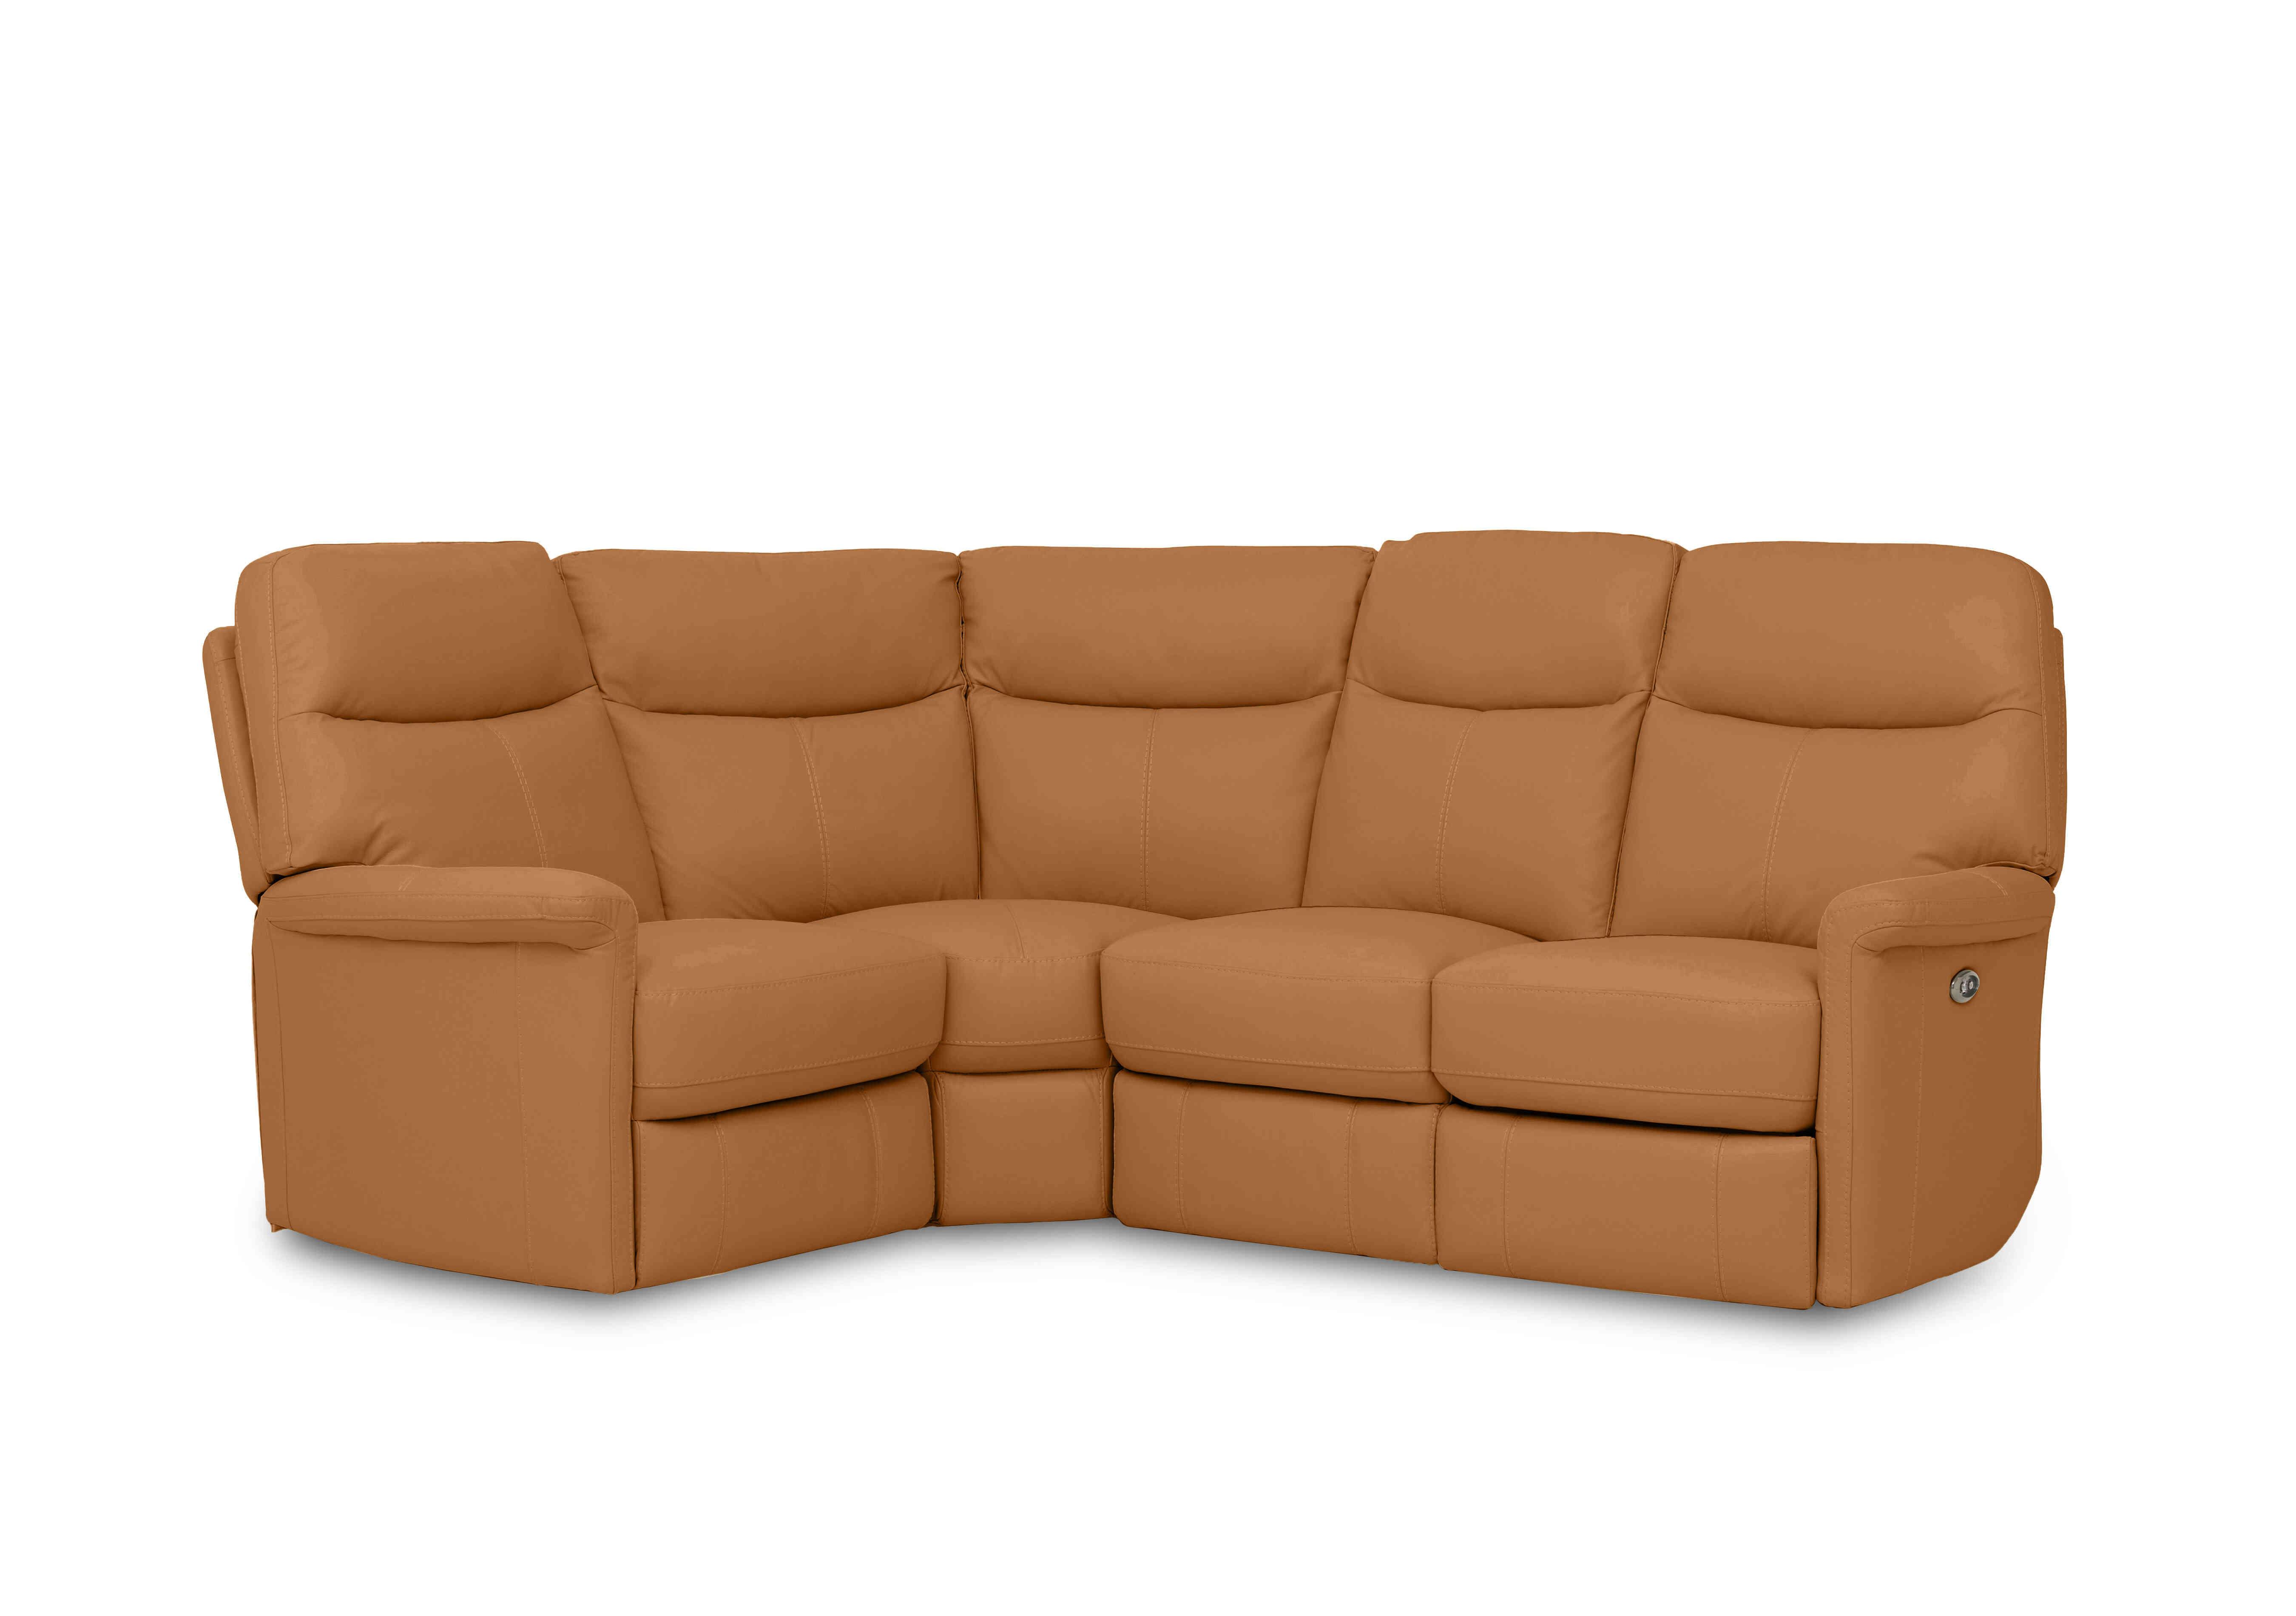 Compact Collection Lille Leather Corner Sofa in Bv-335e Honey Yellow on Furniture Village